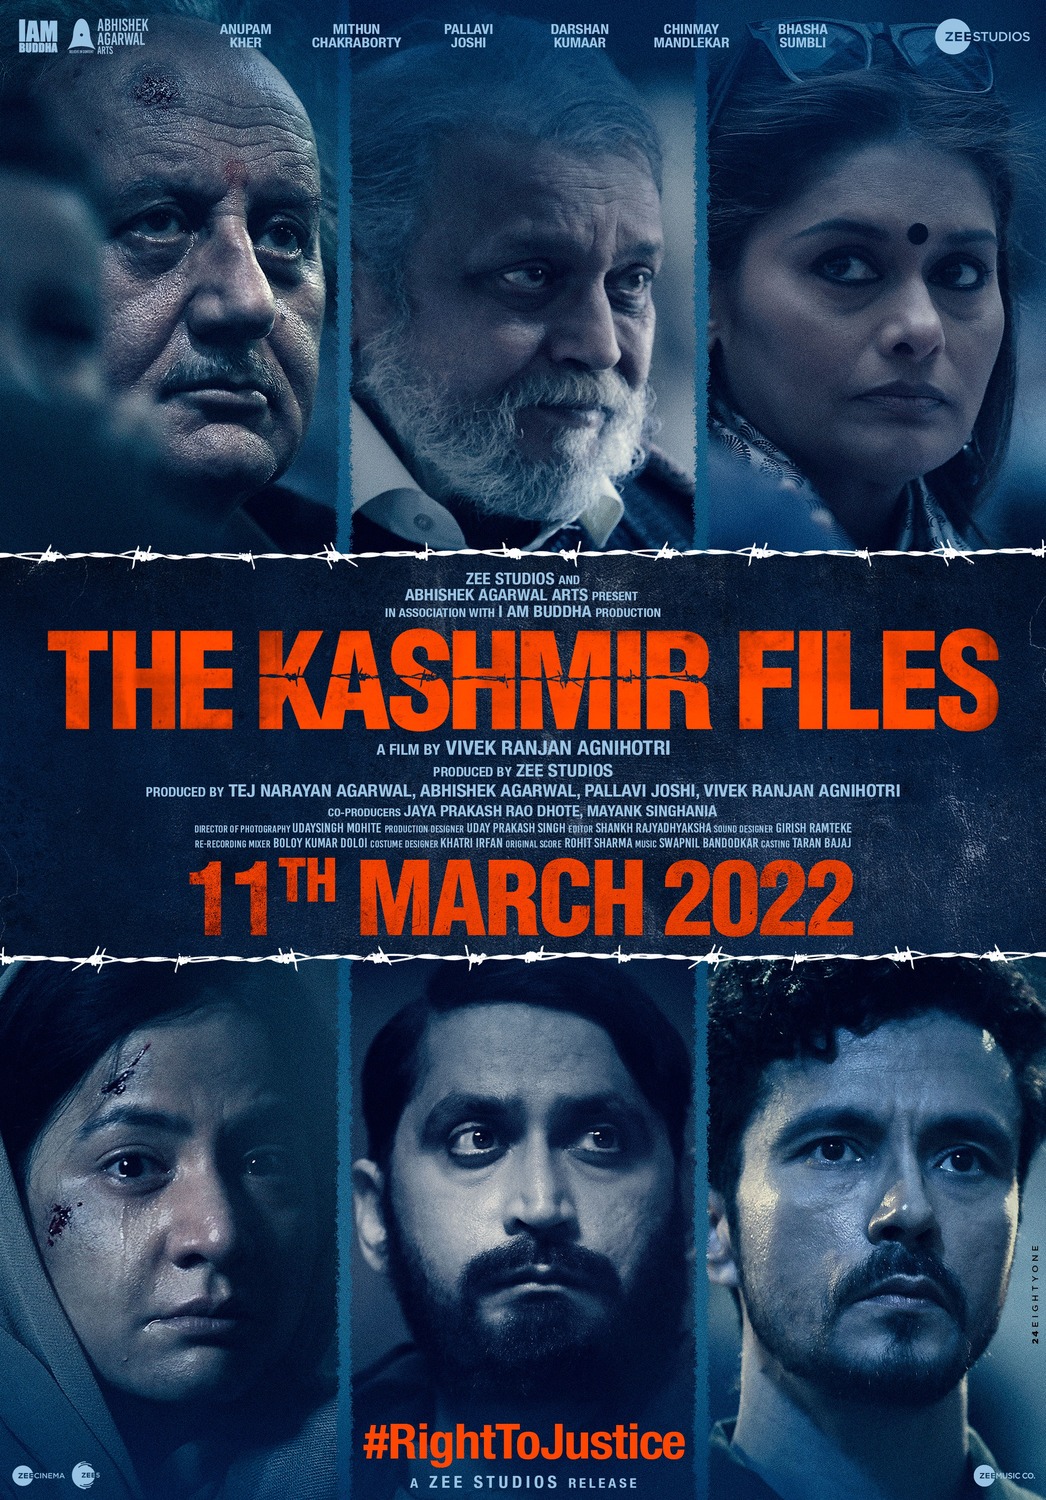 Extra Large Movie Poster Image for The Kashmir Files 